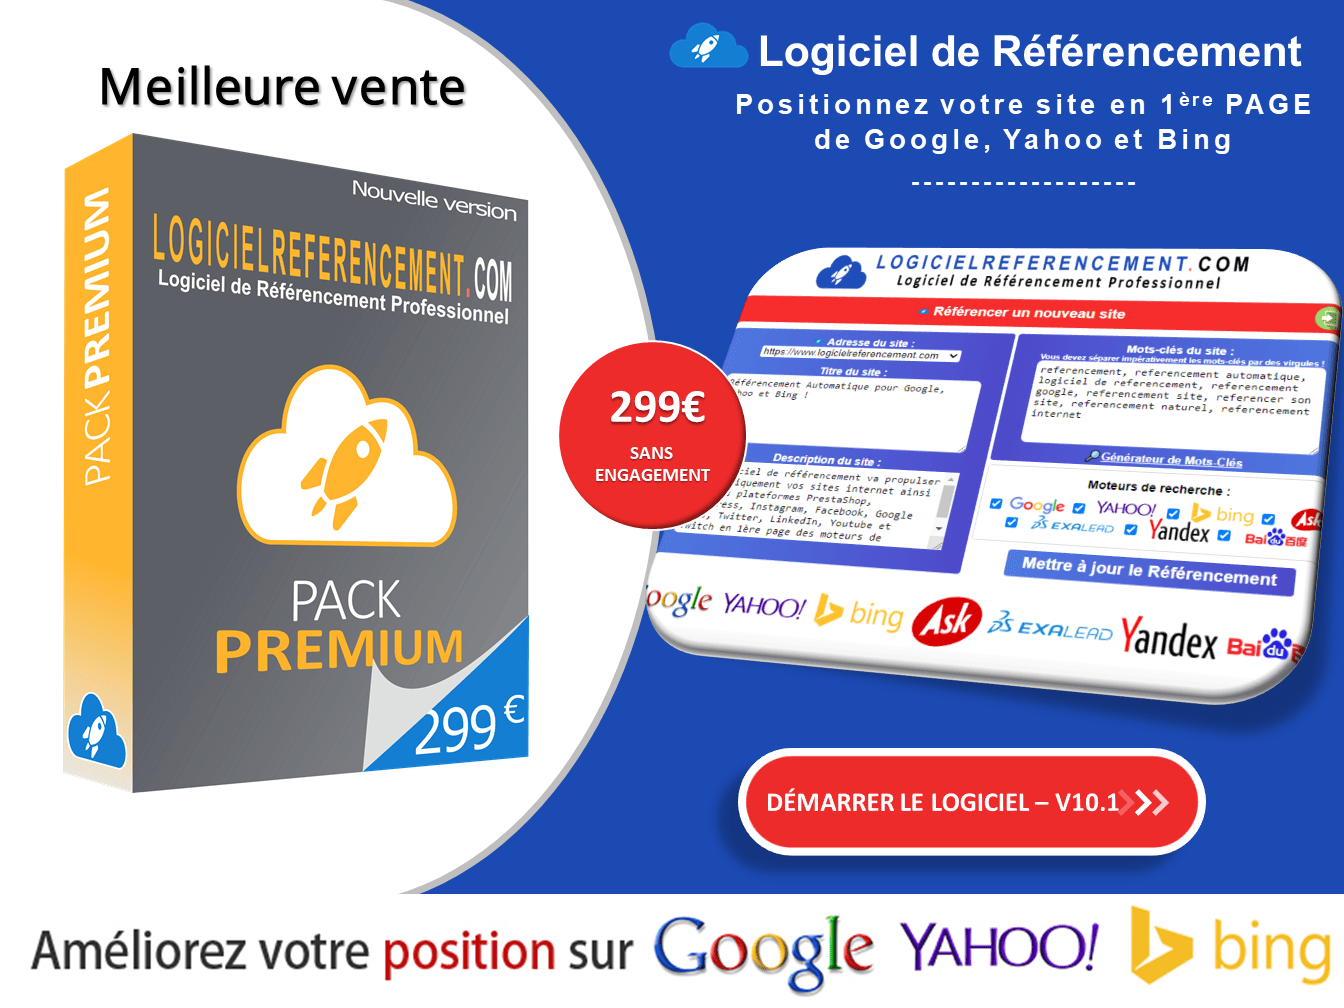 Référencement Site R2f2rencemznt Refrencement Marketing | Page 1